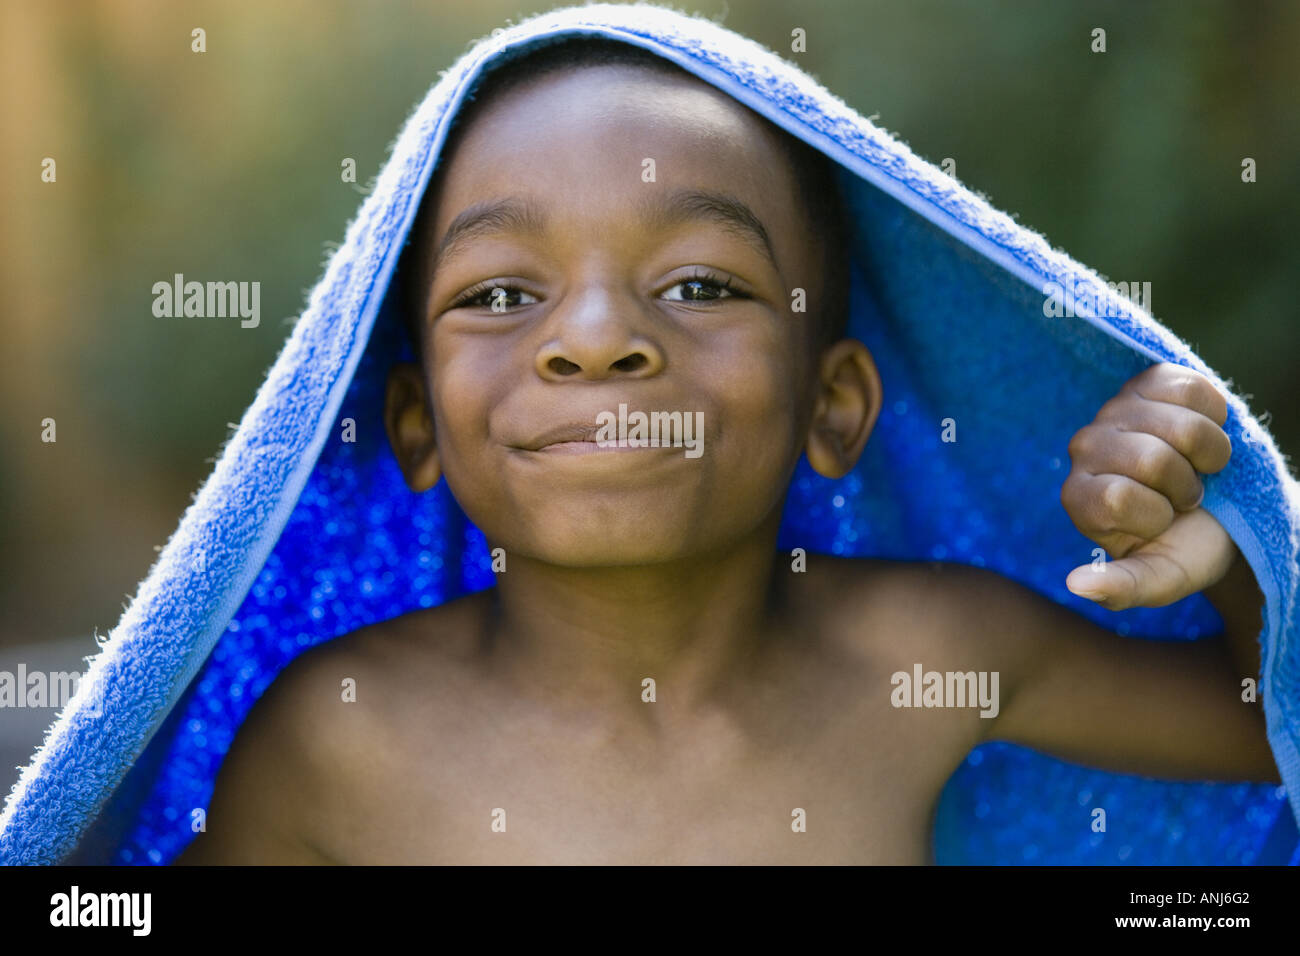 Portrait of a boy smiling with a towel on his head Stock Photo